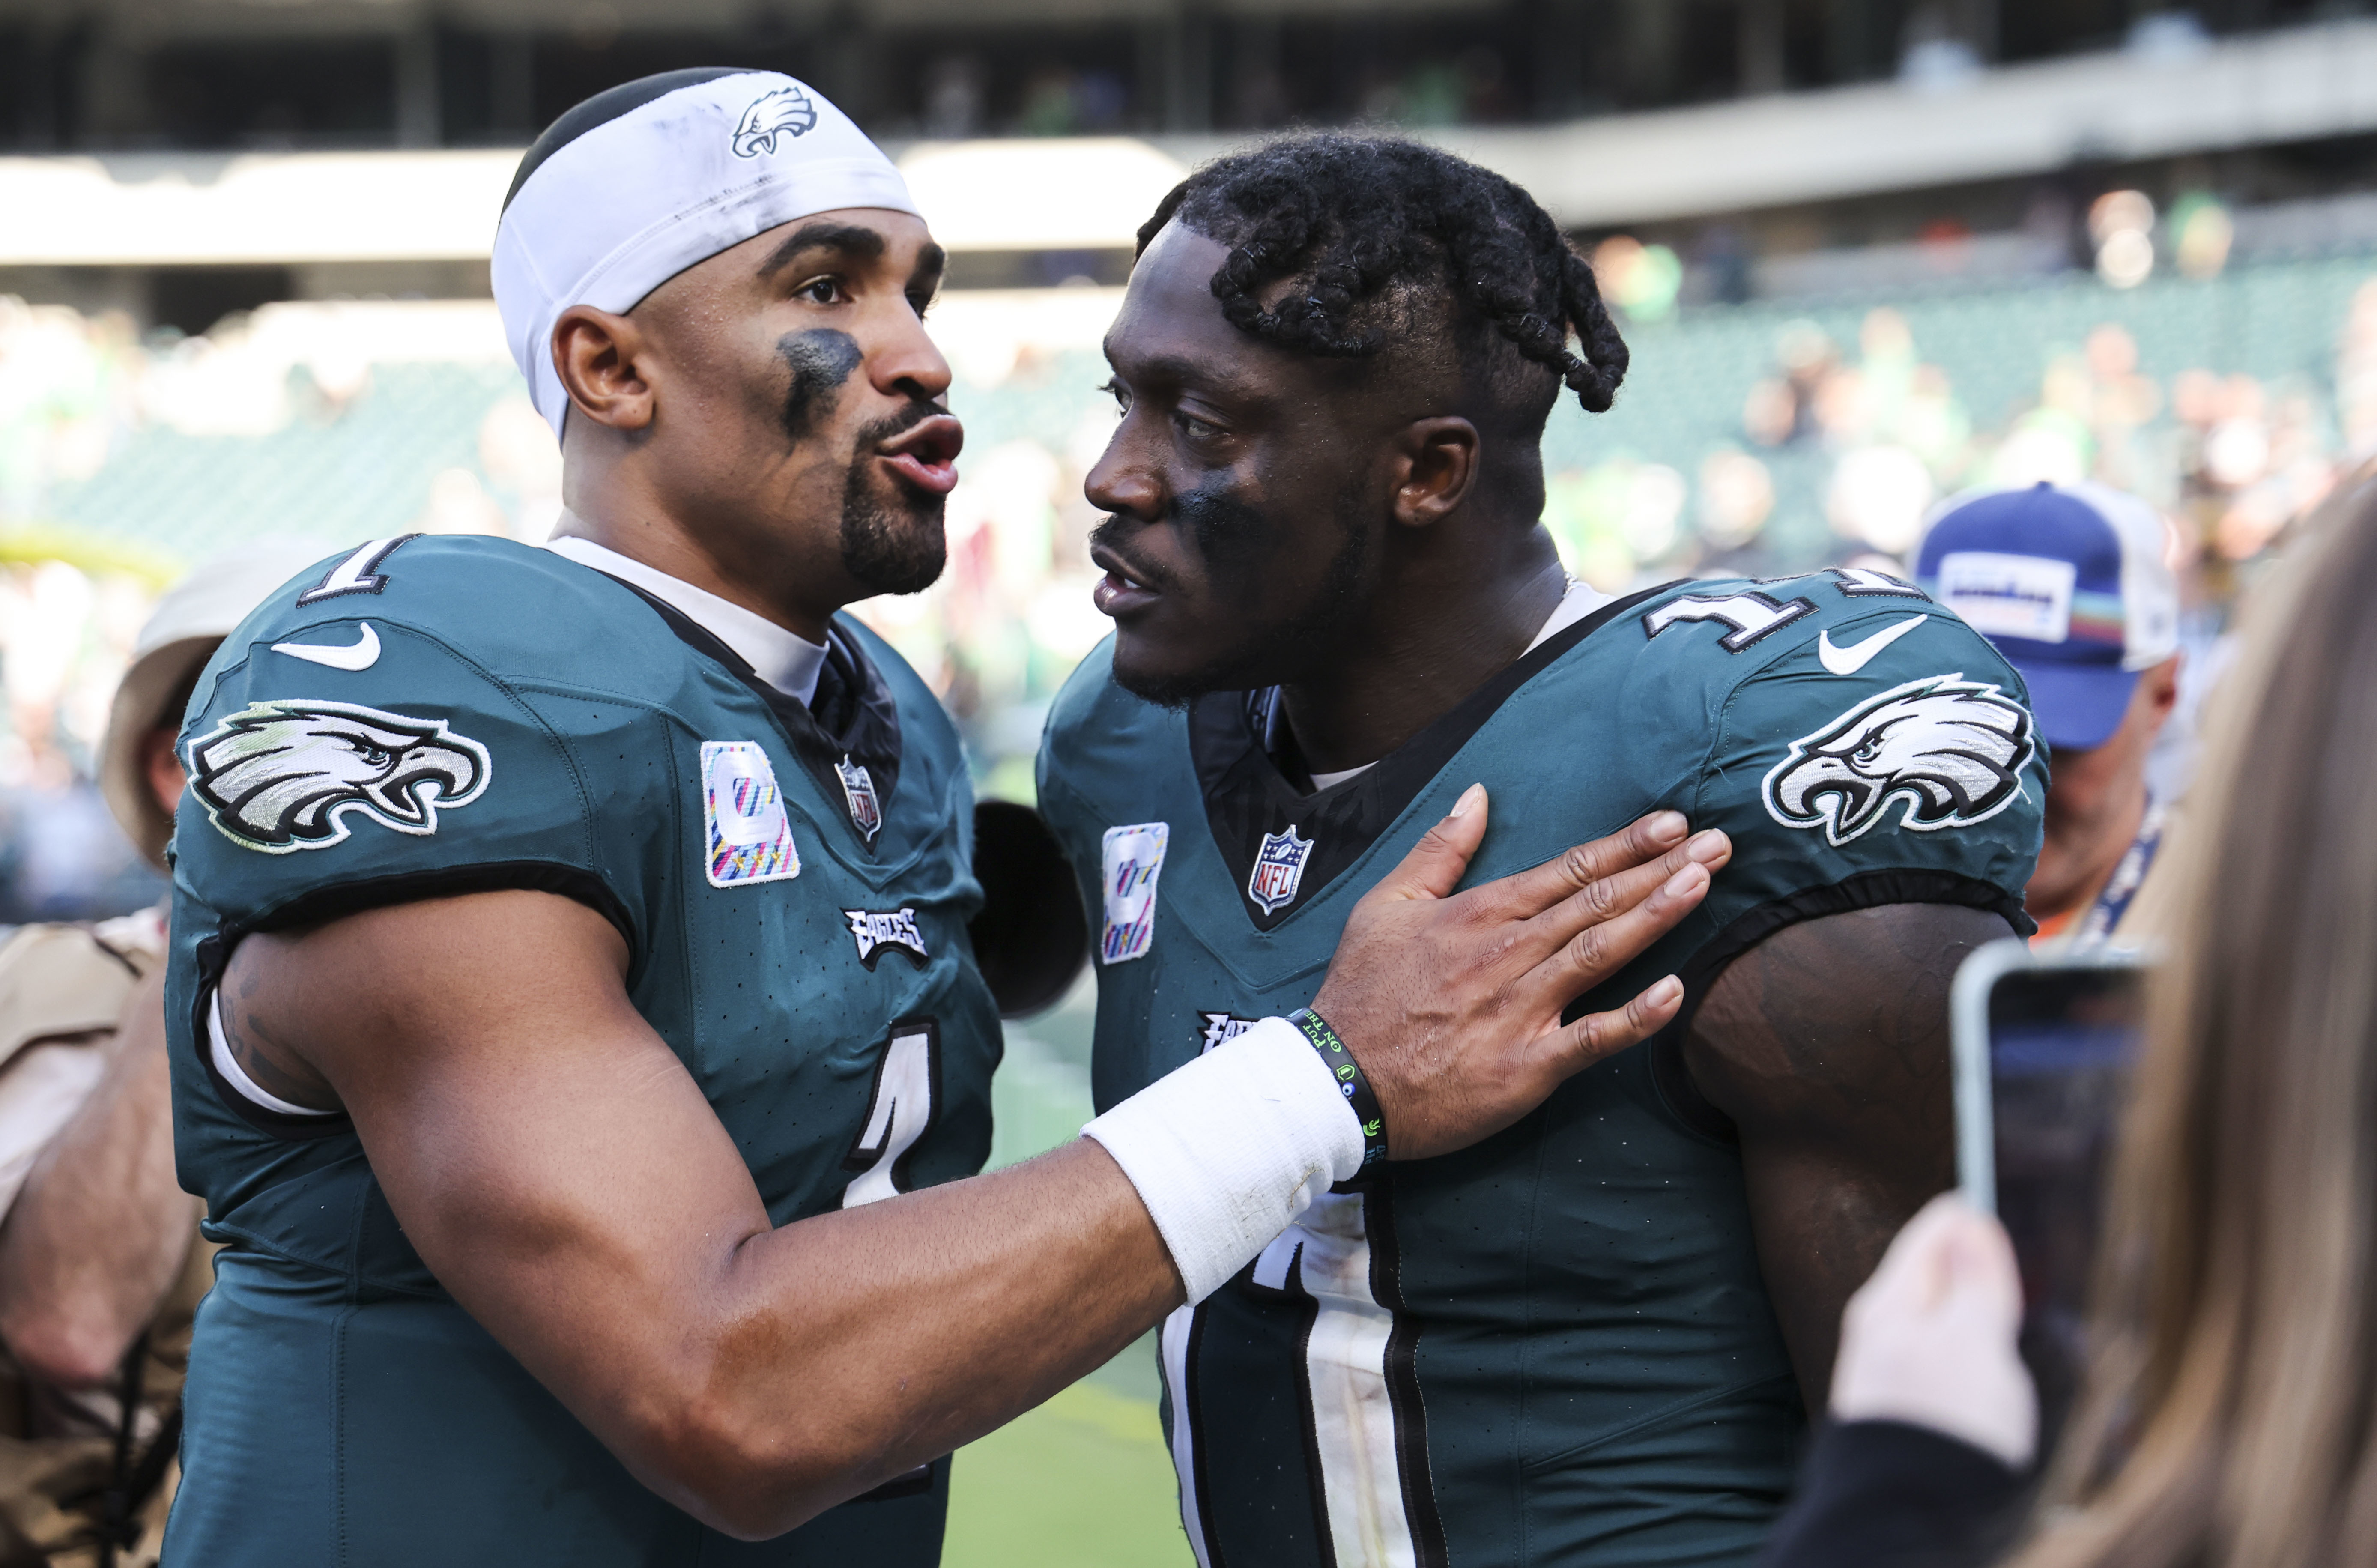 Eagles quarterback Jalen Hurts wakes up and finds his playmakers in overtime